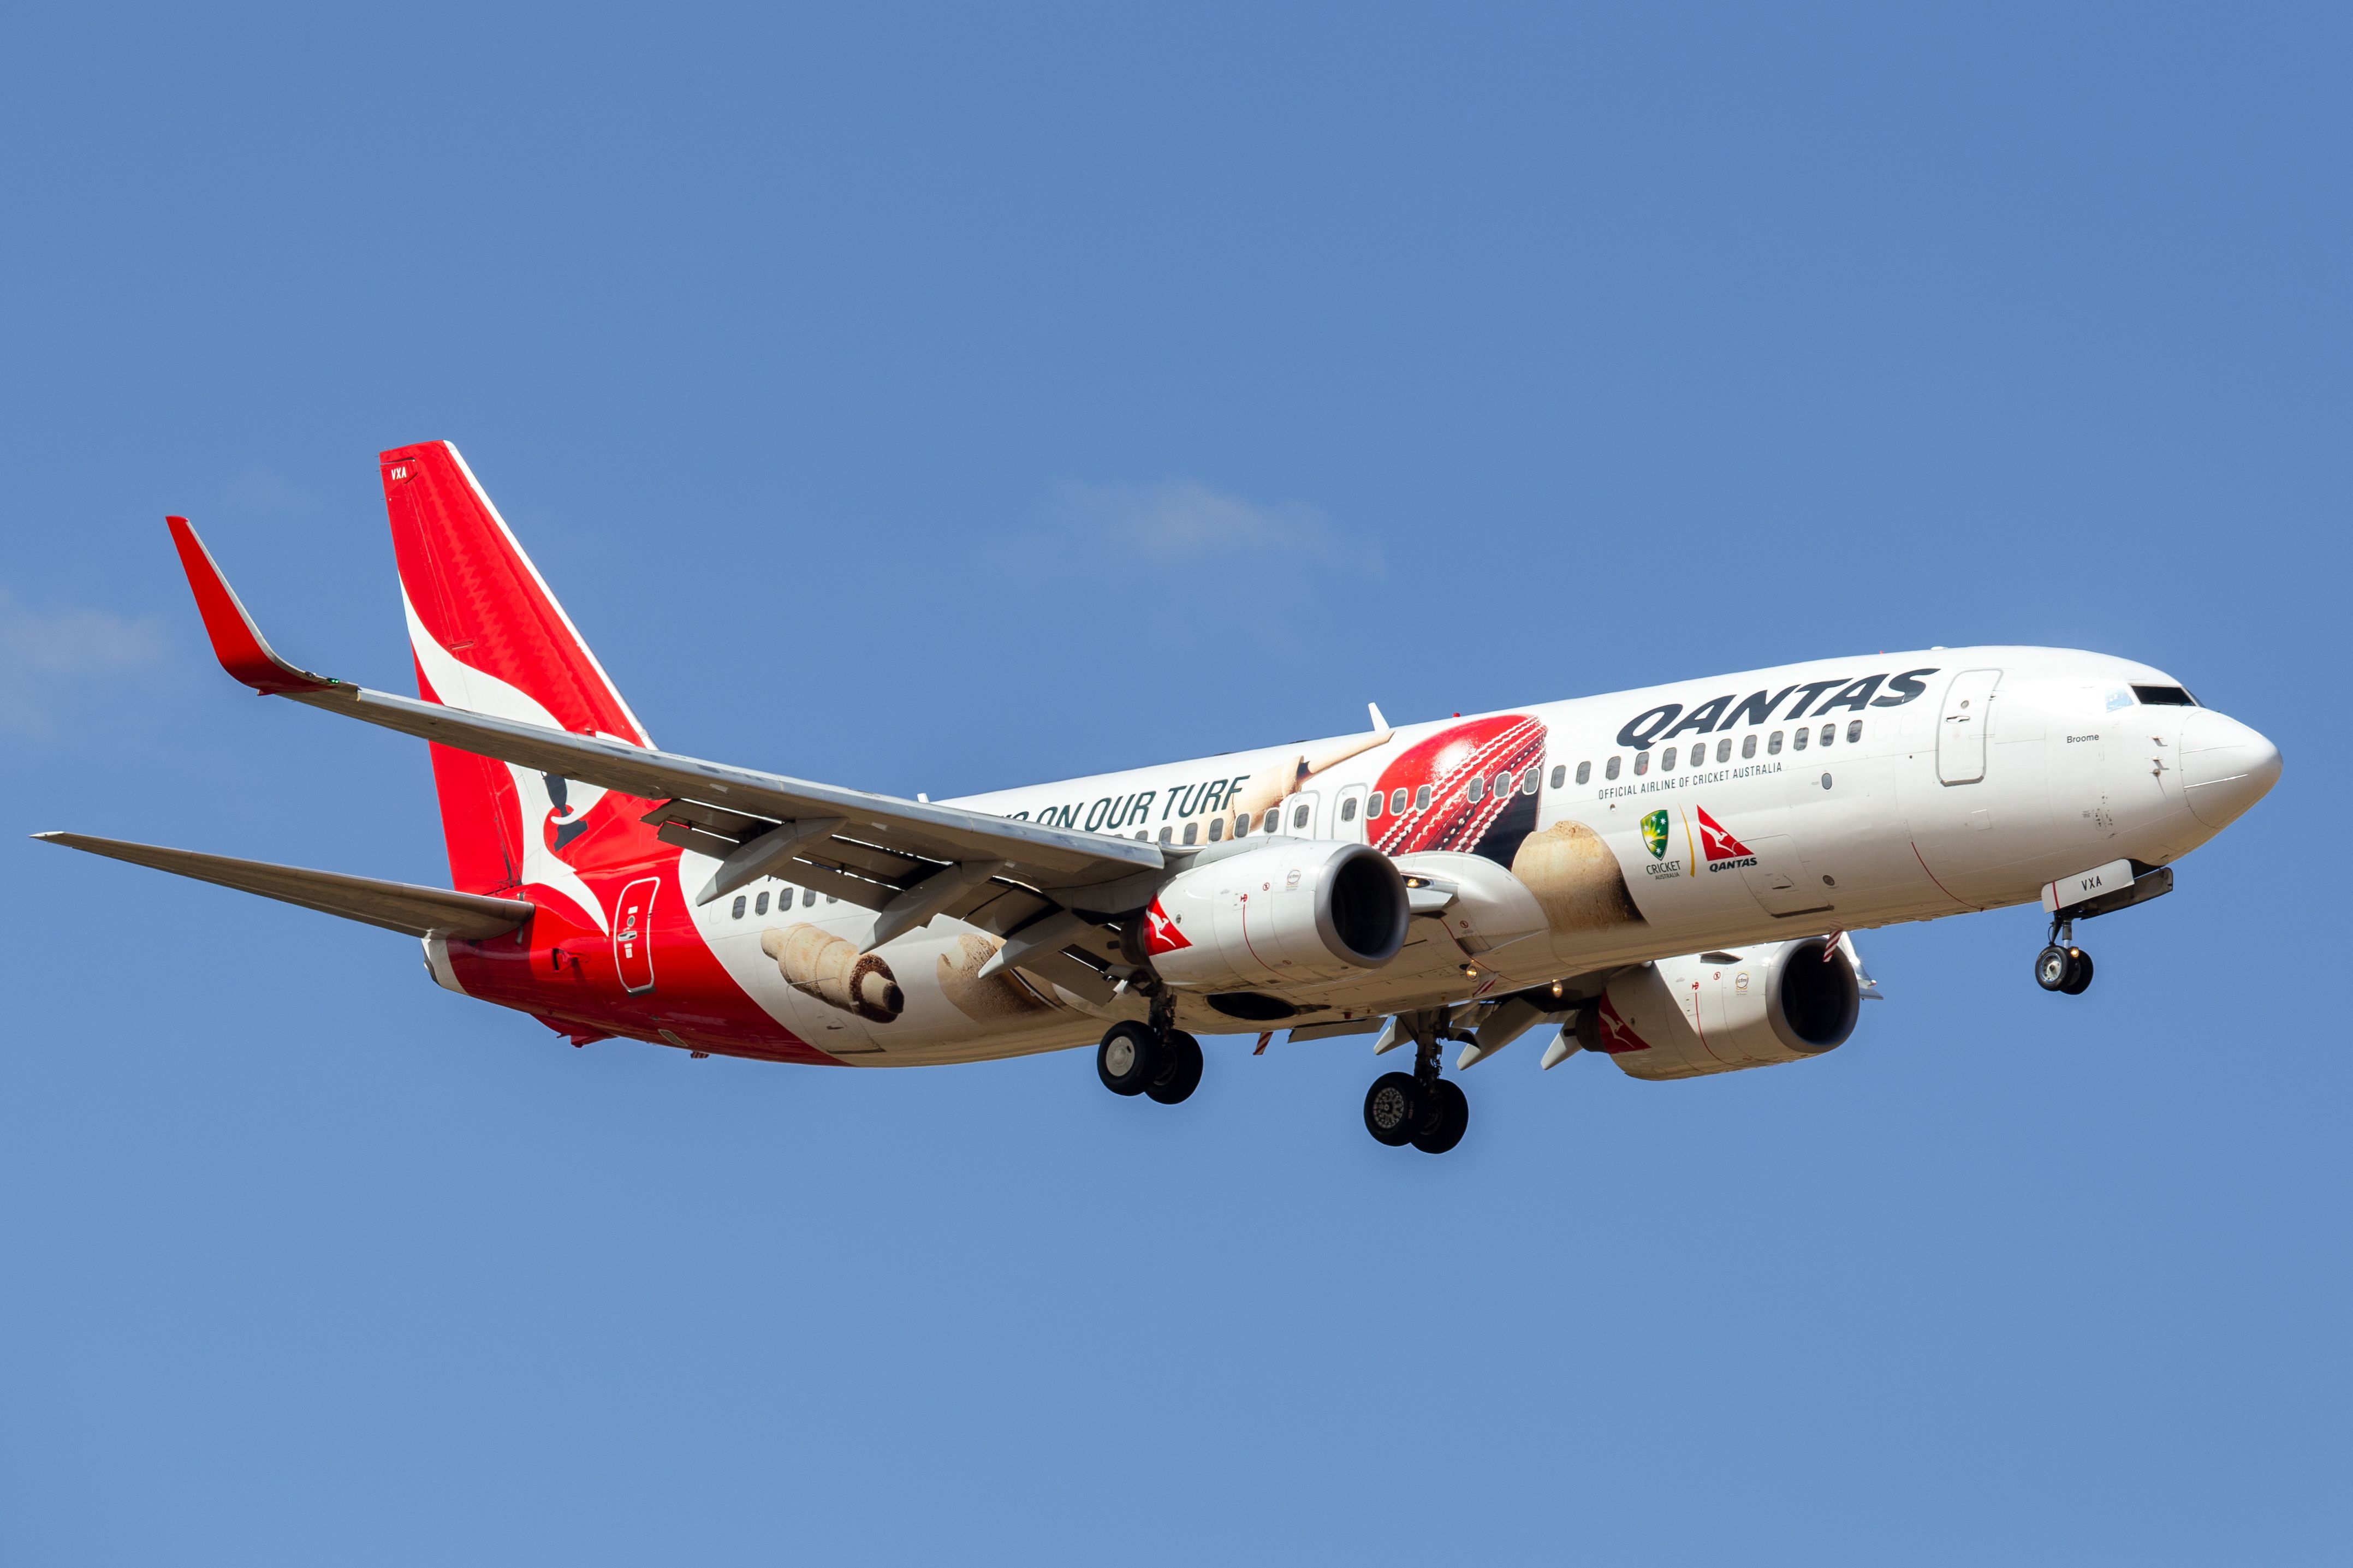 A Qantas Boeing 737 in Cricket Livery.